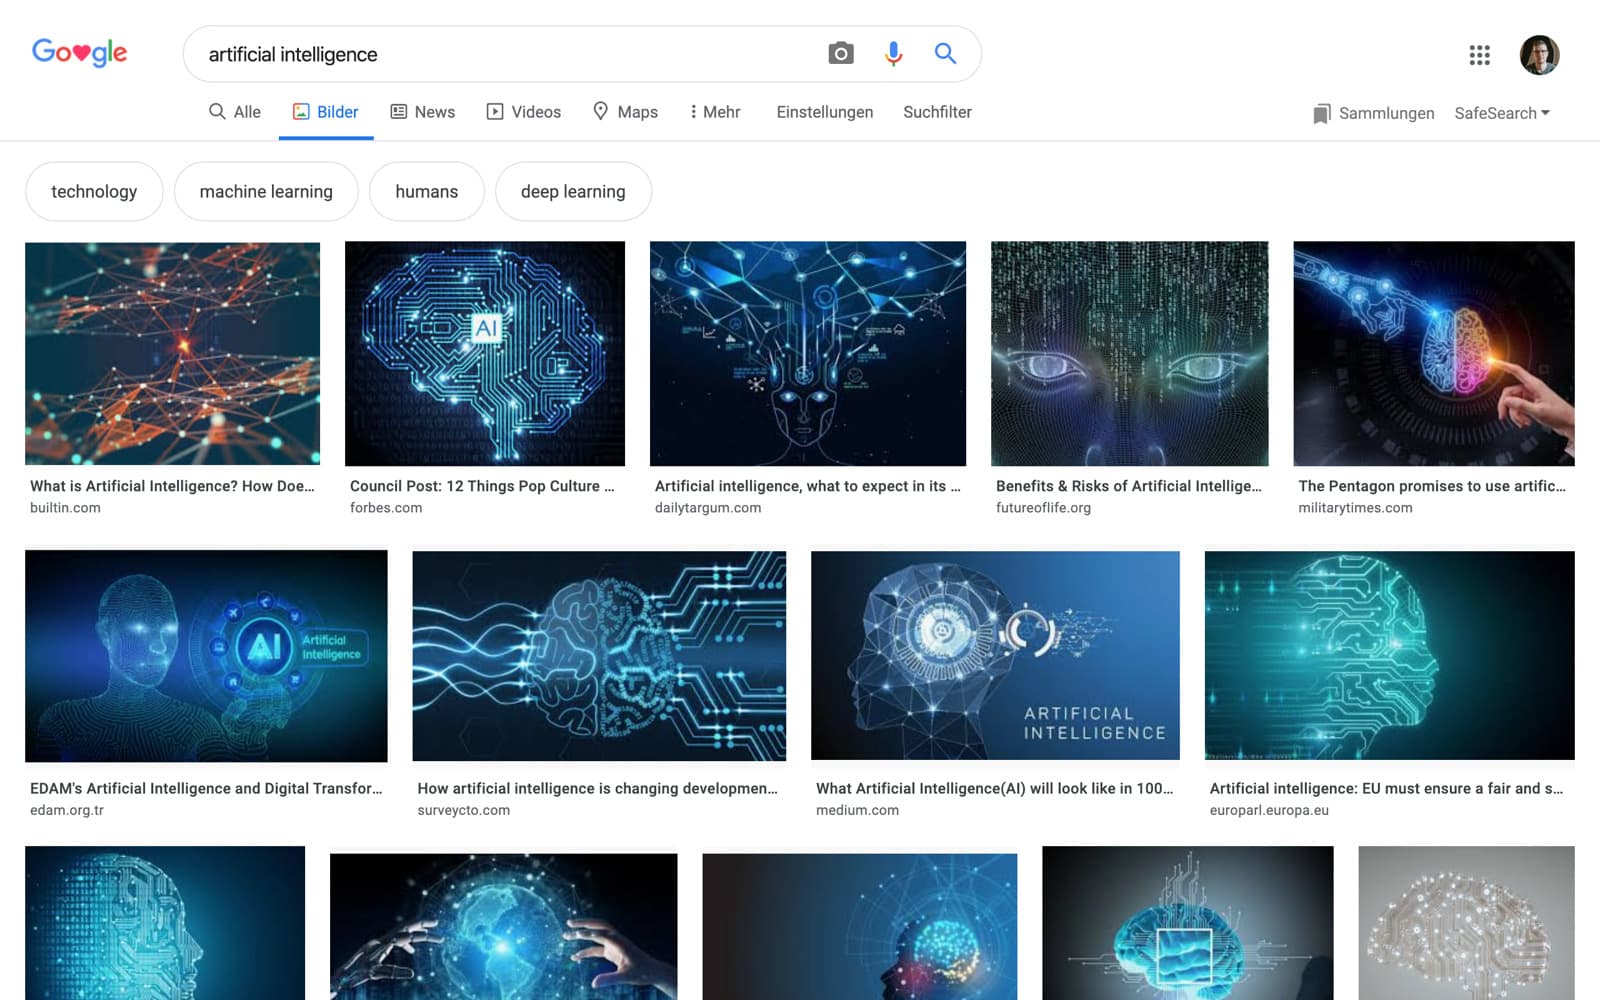 A Google Search for images of artificial intelligence